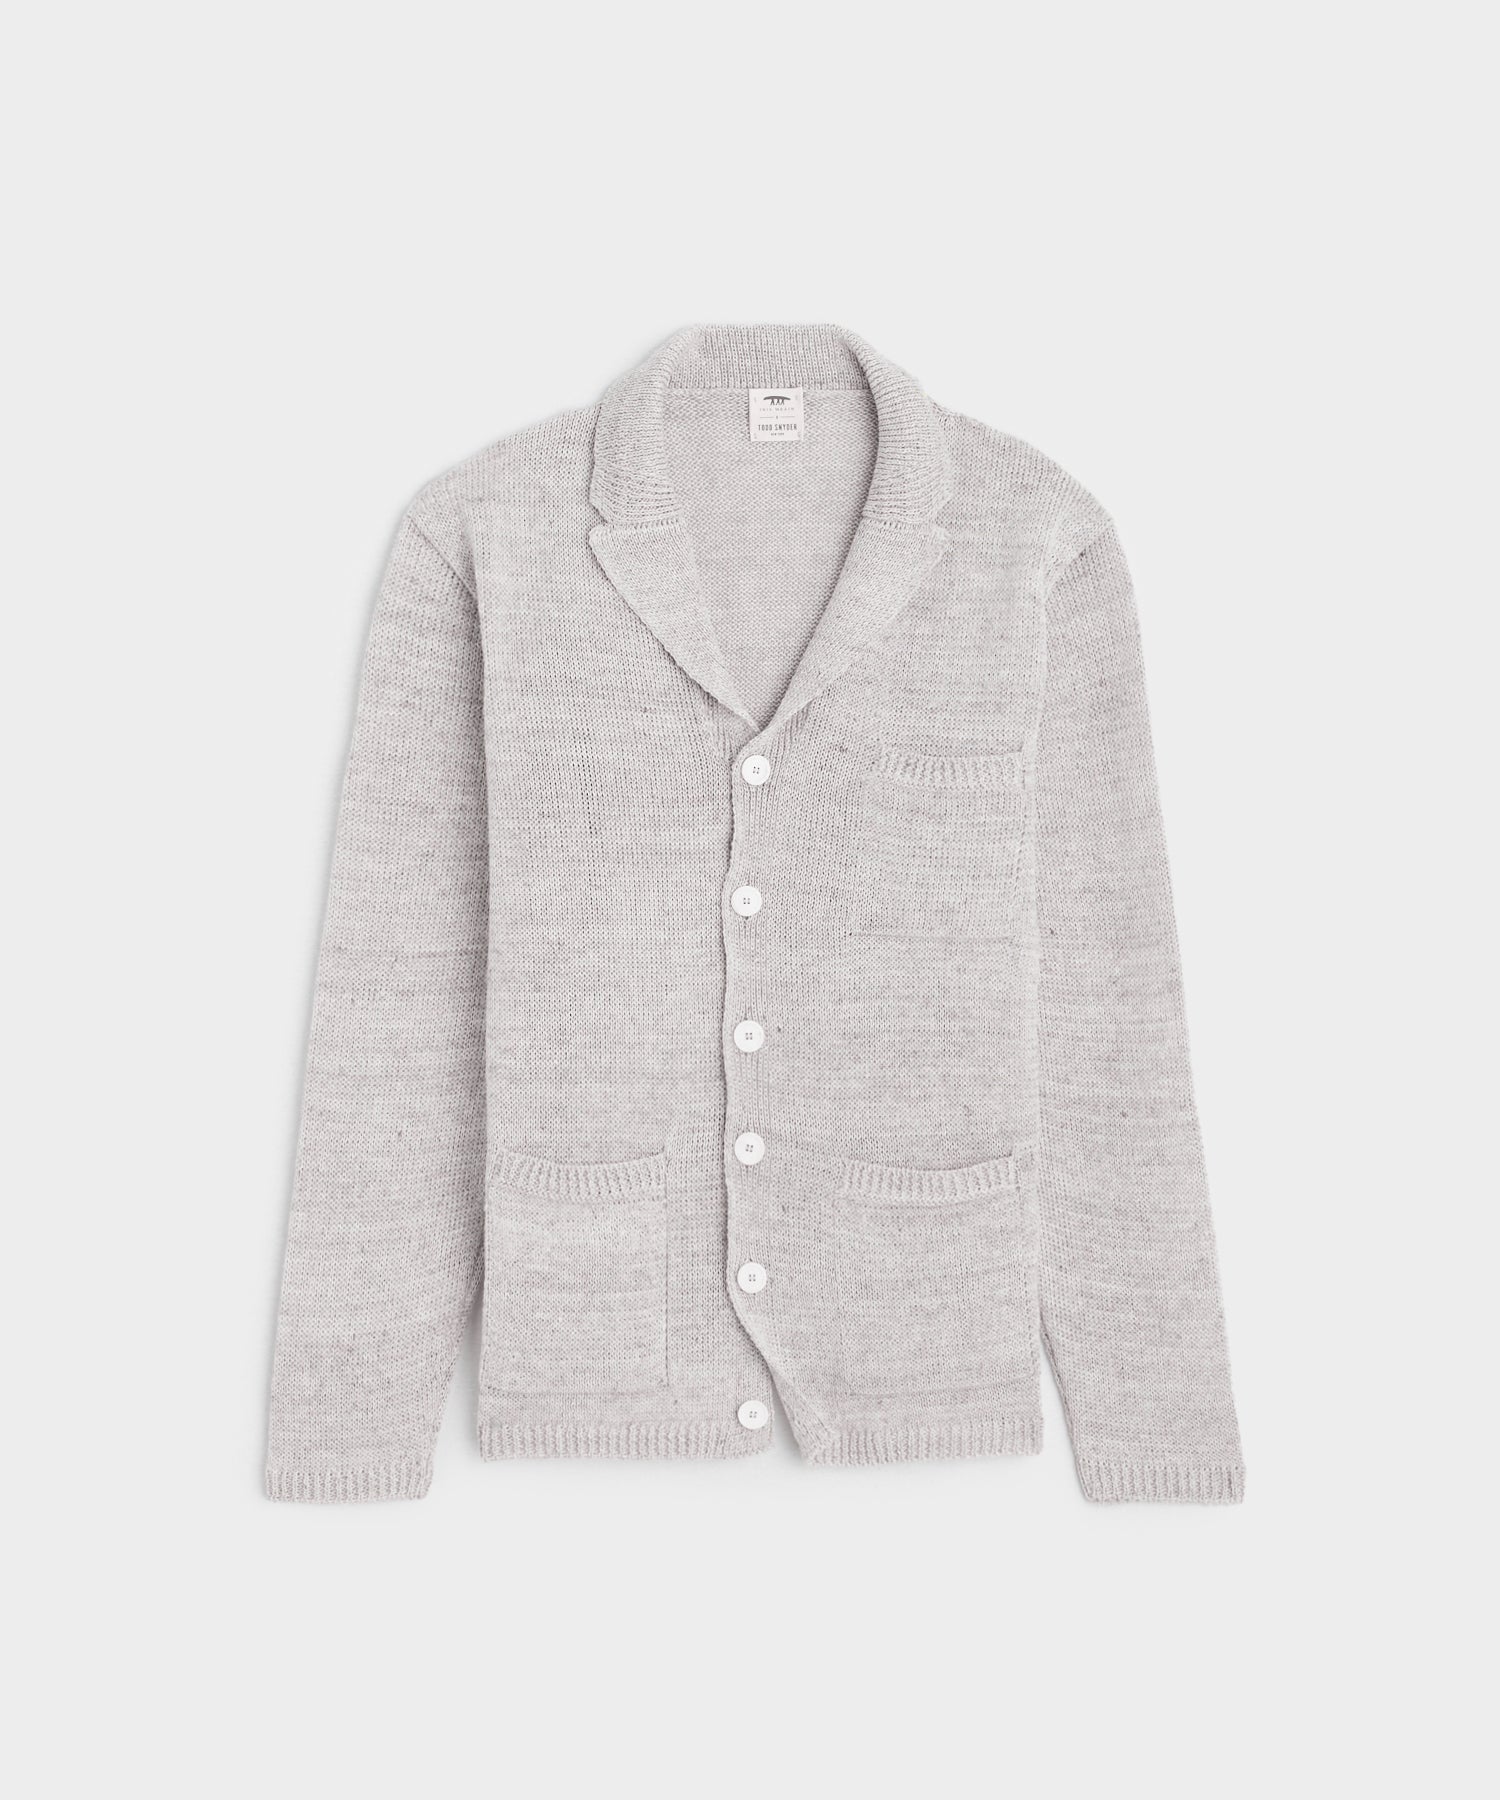 Inis Meáin Linen Pub Jacket in Silver Mix